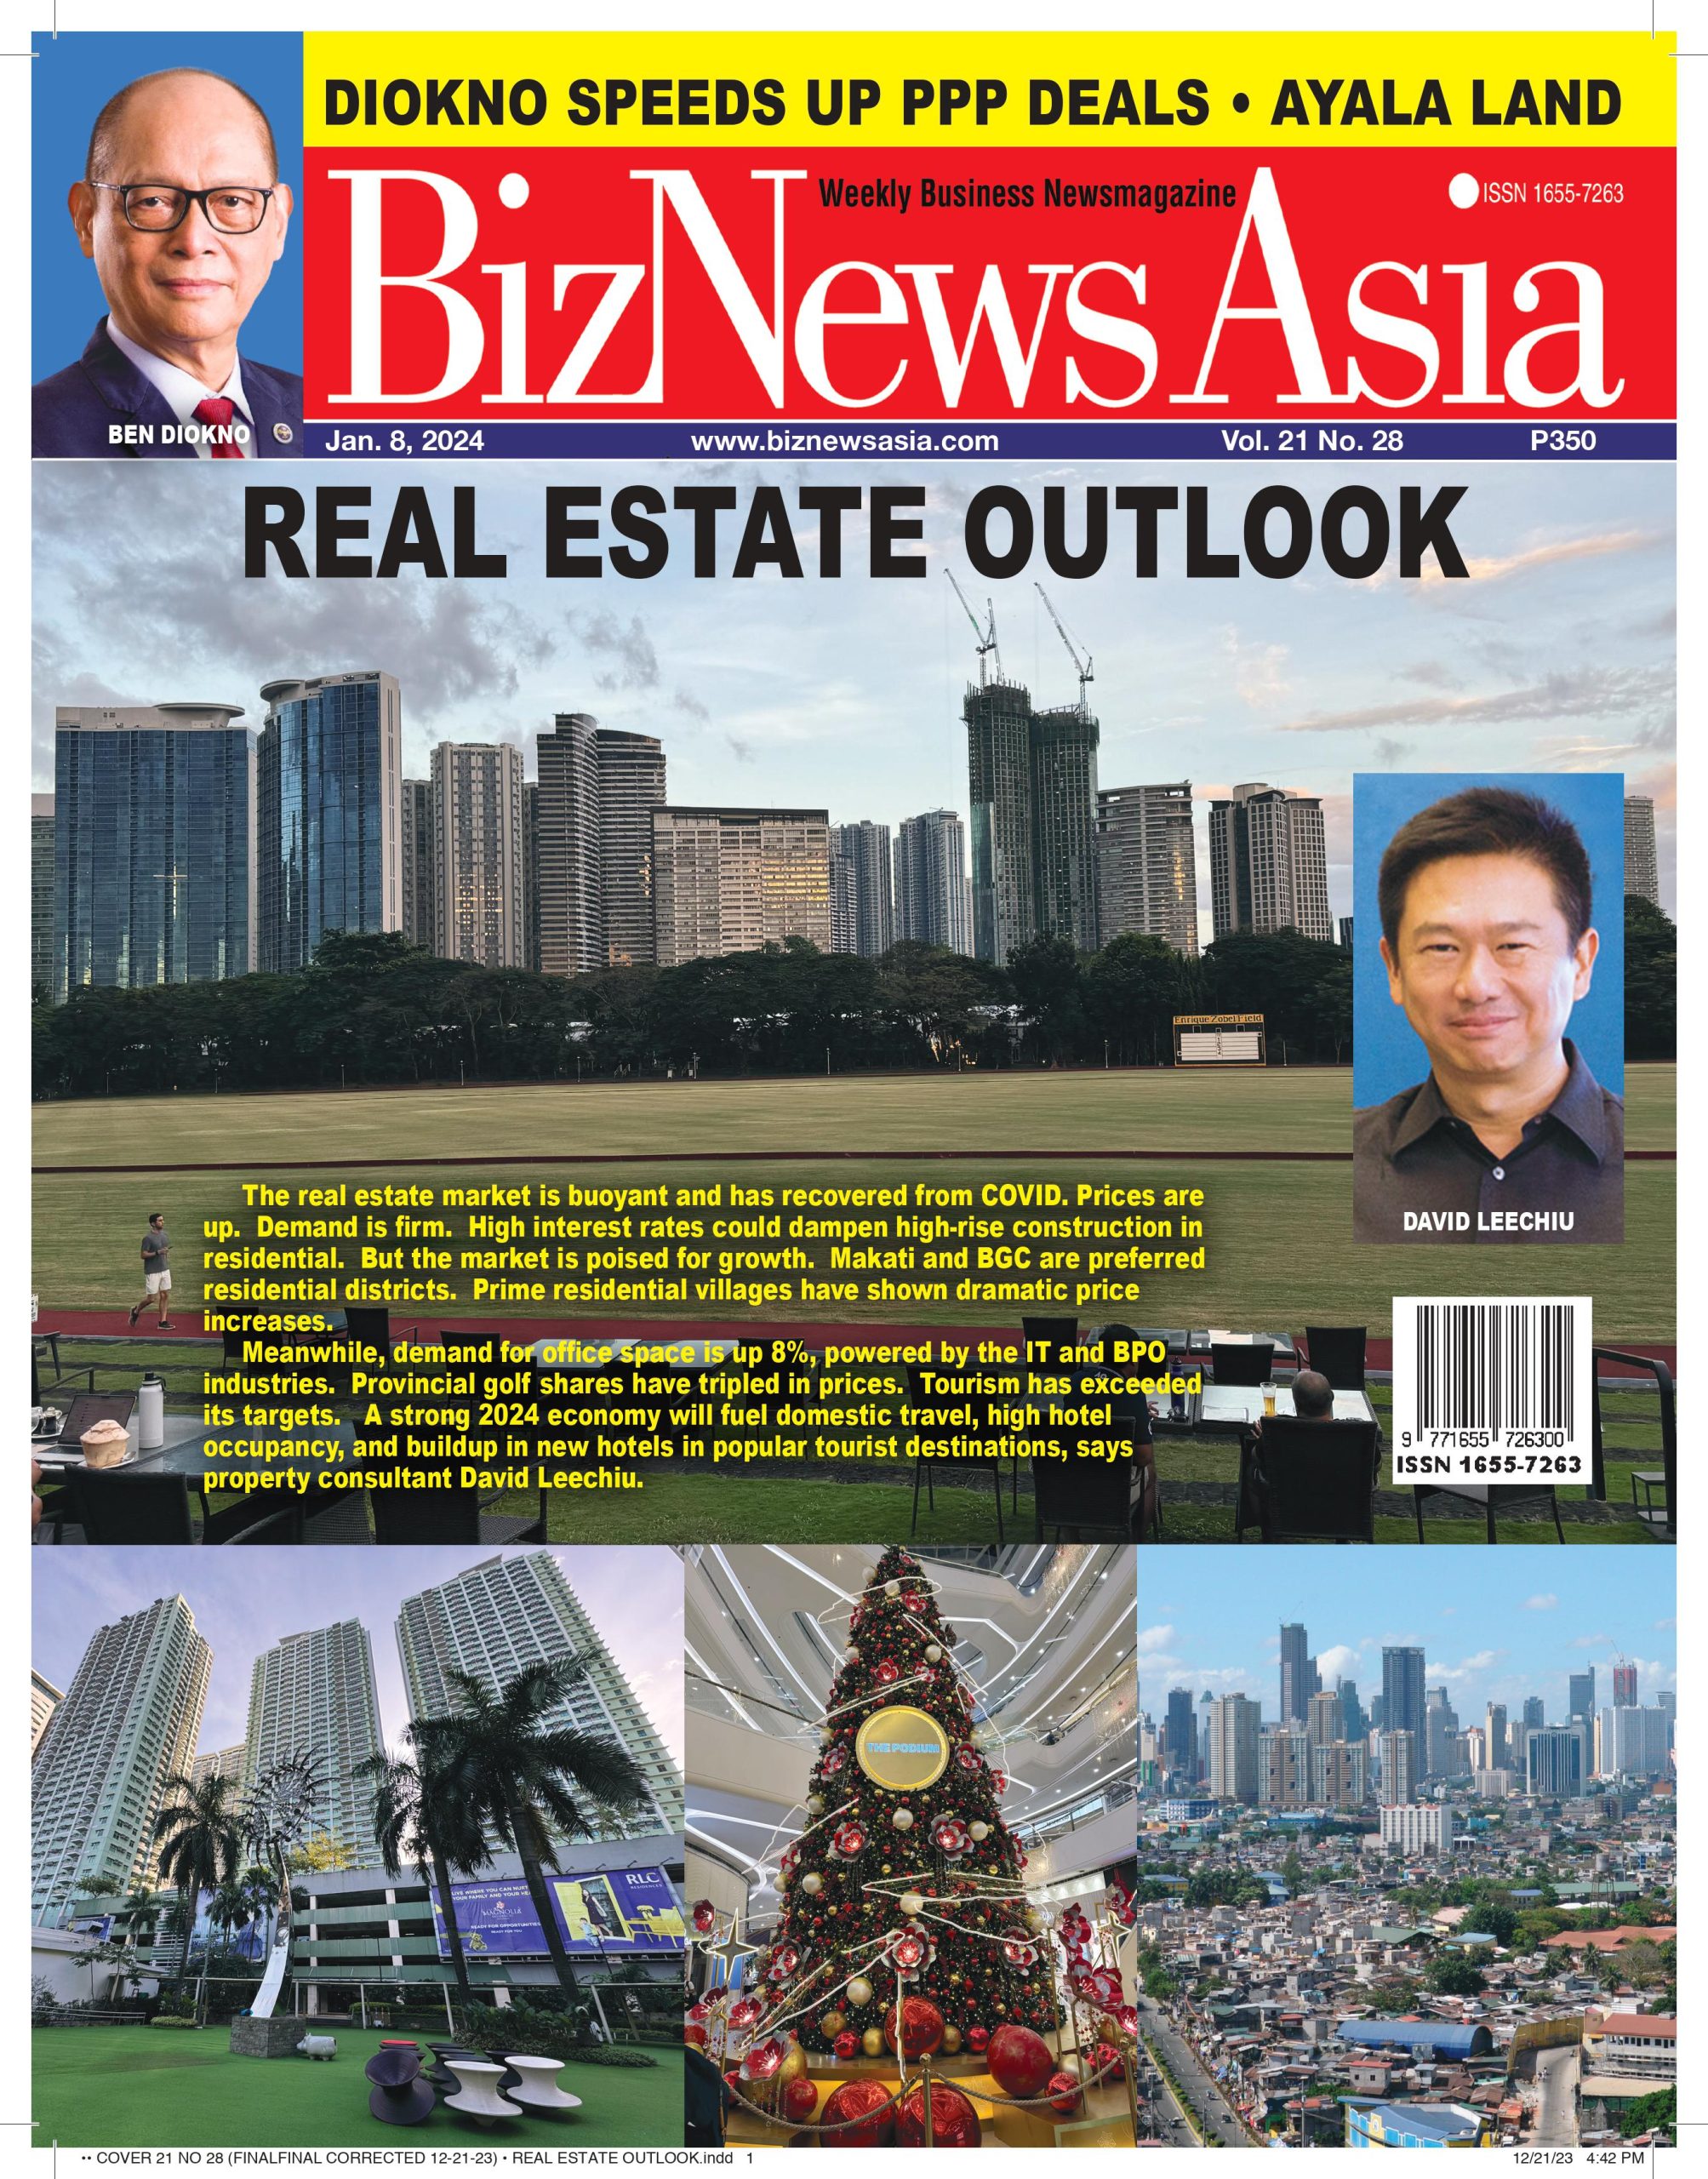 REAL ESTATE OUTLOOK